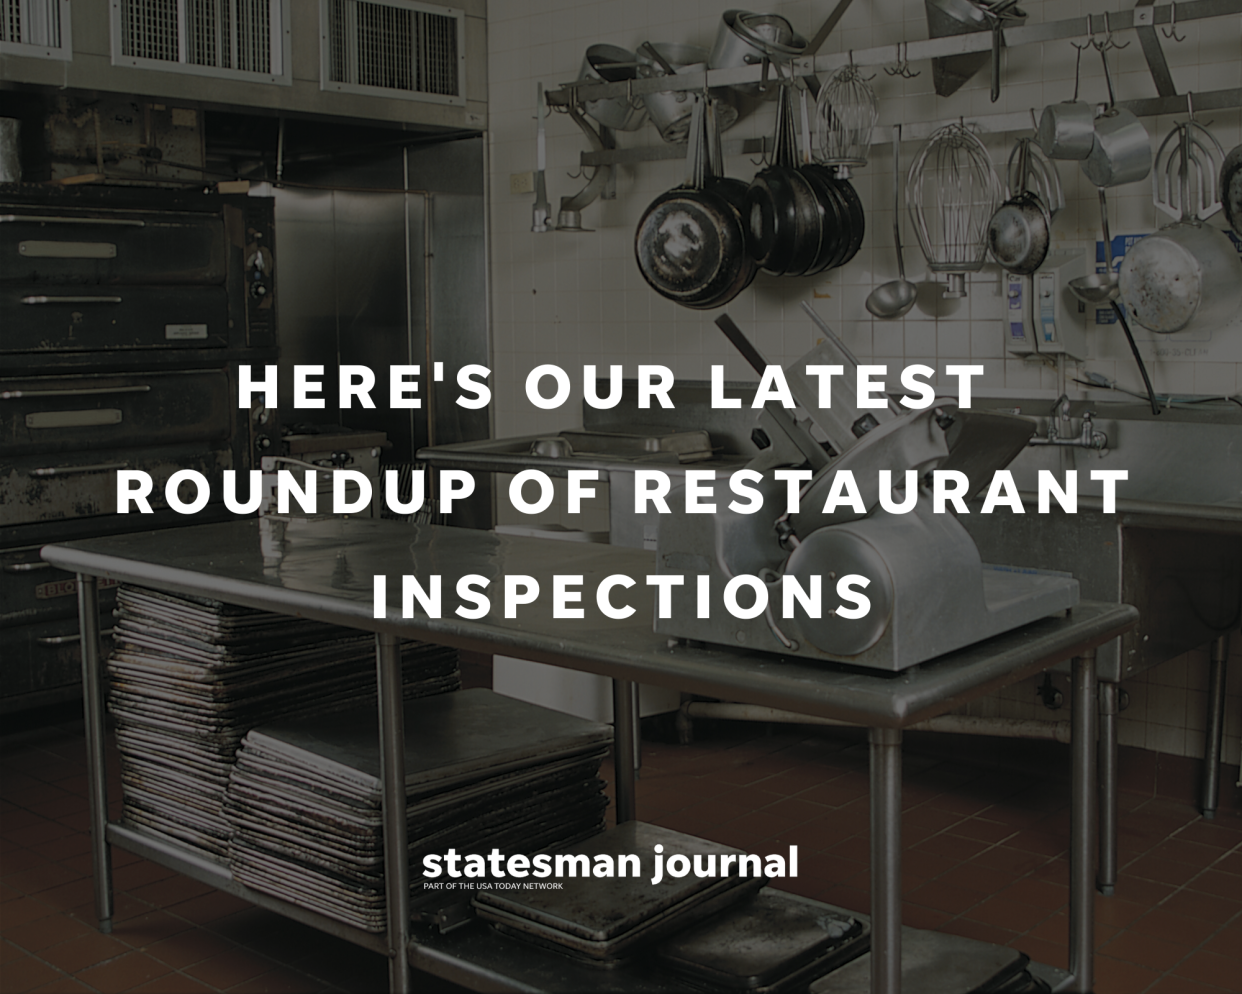 Twice annually, licensed restaurants receive unannounced inspections that focus on food temperatures, food preparation practices, worker hygiene, dish-washing and sanitizing, and equipment and facility cleanliness.